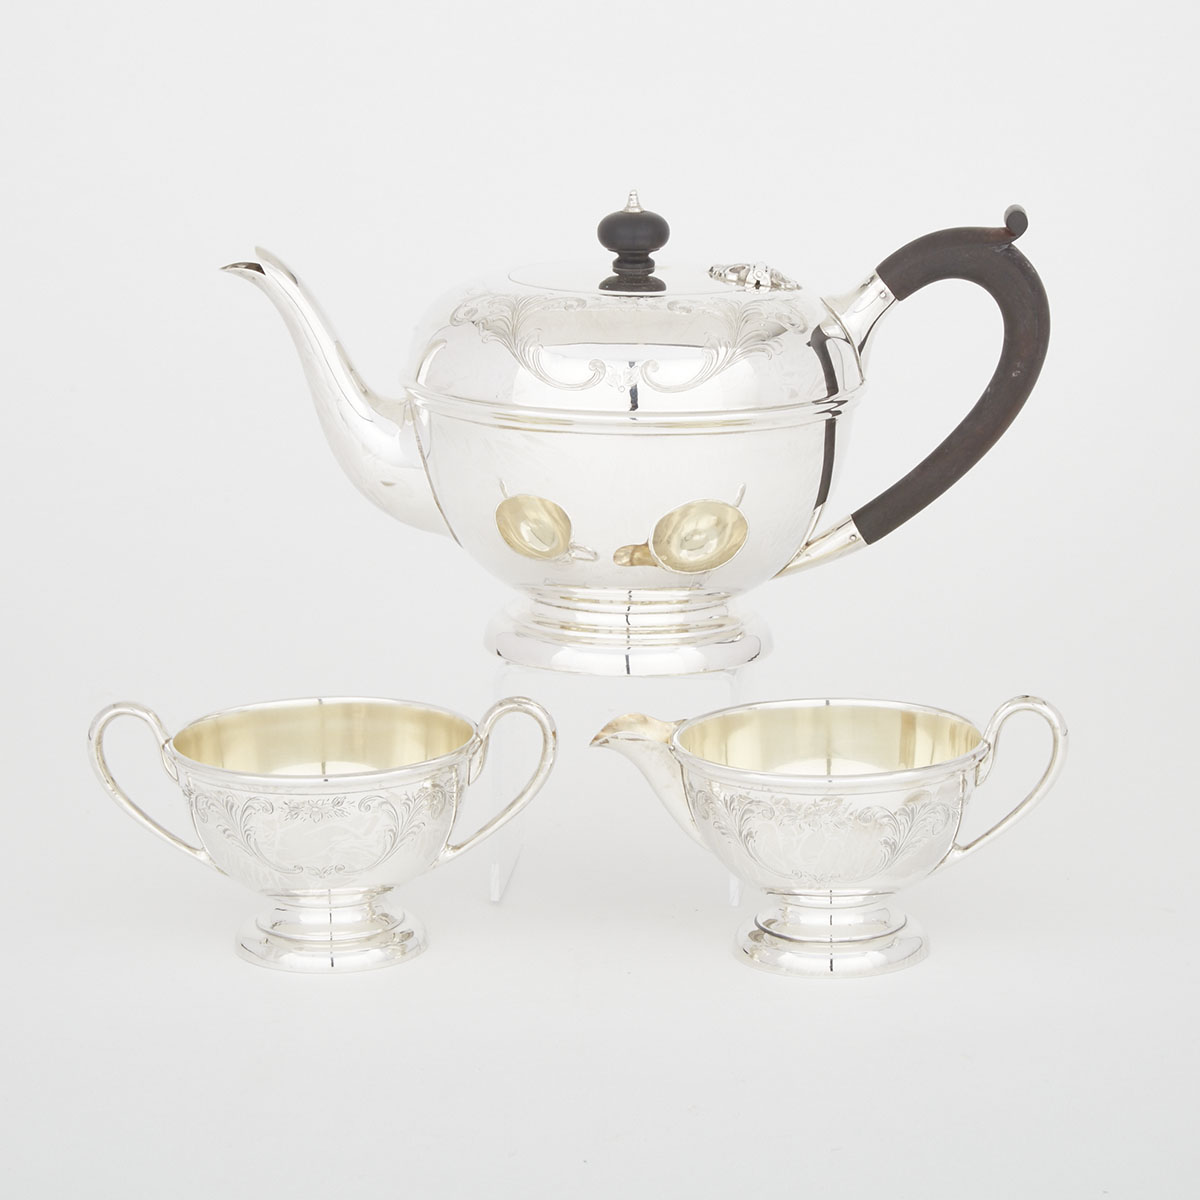 Canadian Silver Tea Service, Henry Birks & Sons, Montreal, Que., 1932